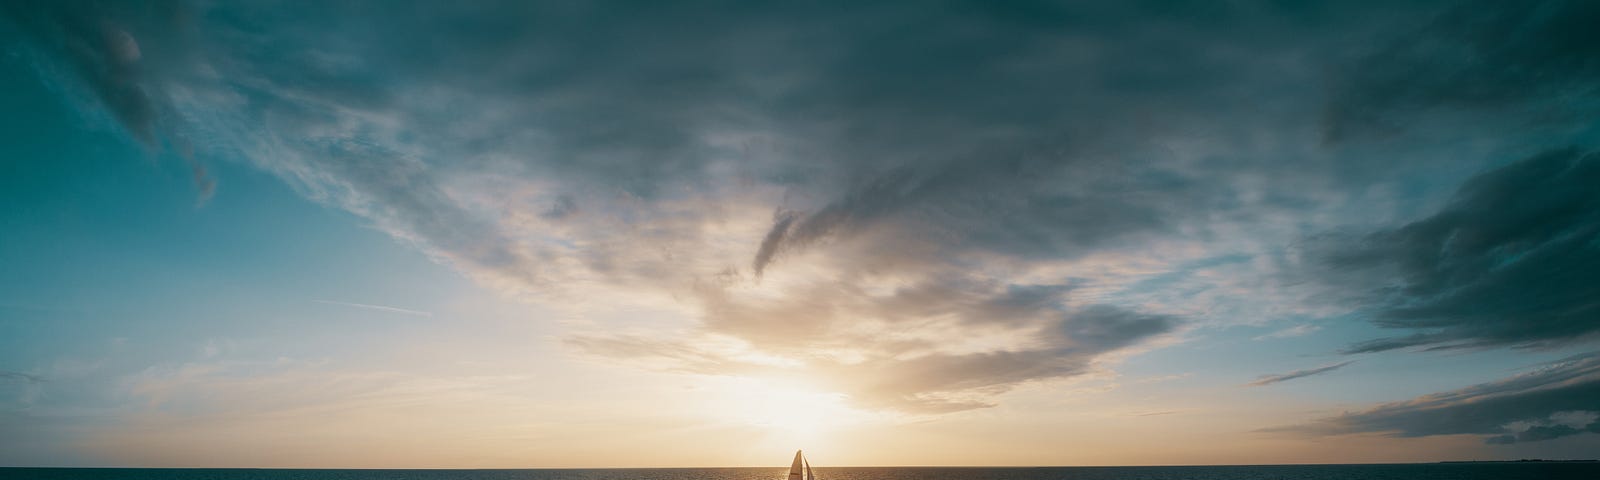 A sailboat in the ocean at the sunset.